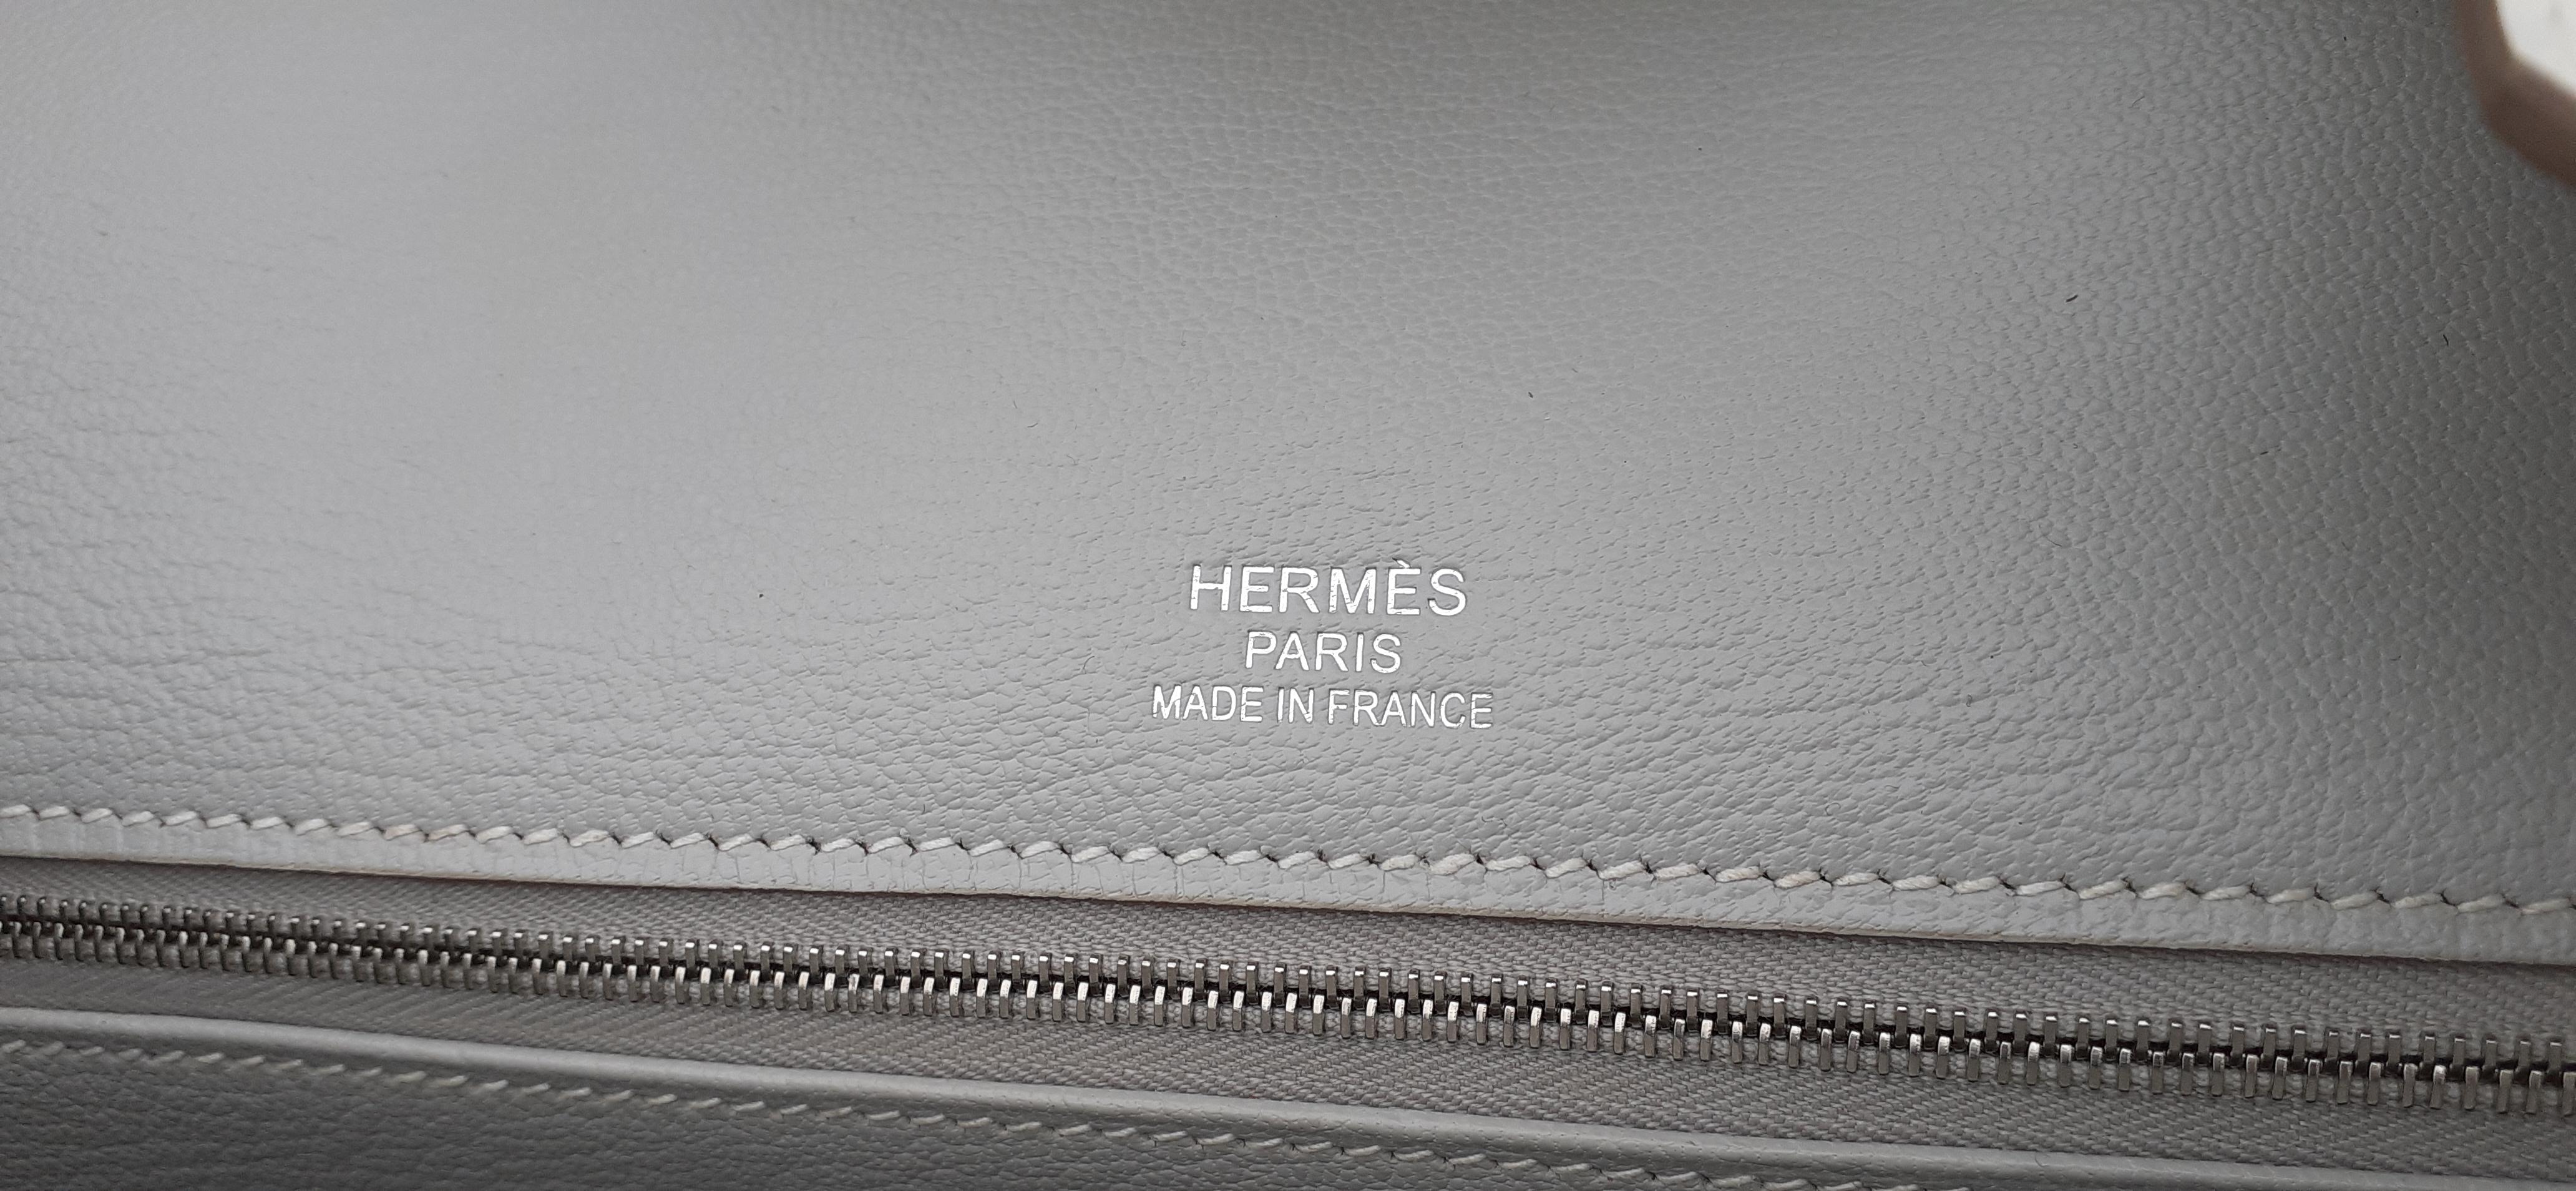 Hermès Birkin 35 Bag Limited Edition Ghillies Grizzly Doblis Grey White Caillou For Sale 4